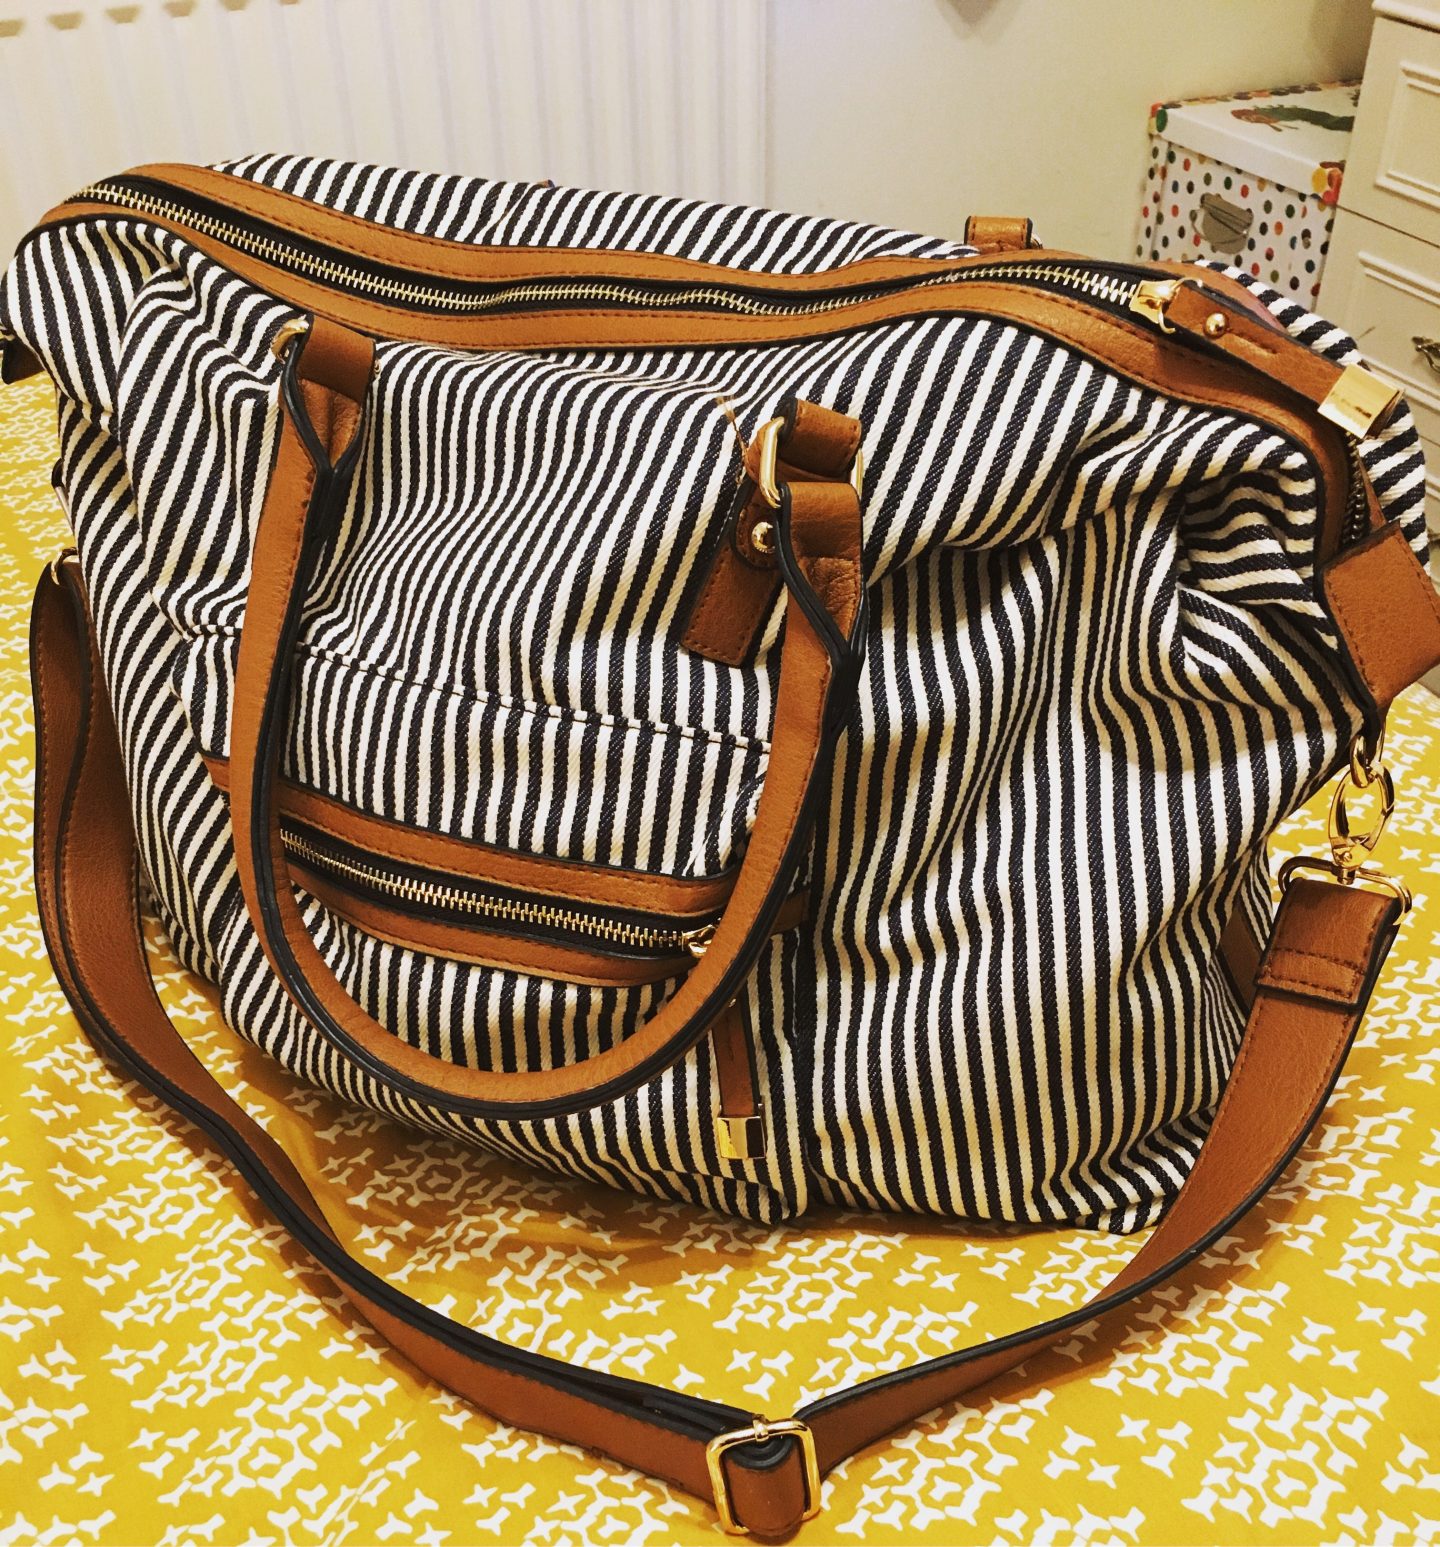 A photo of my new weekend travel bag, which is black and white striped with brown detailing and brown straps. It's sat on my yellow duvet in my room.